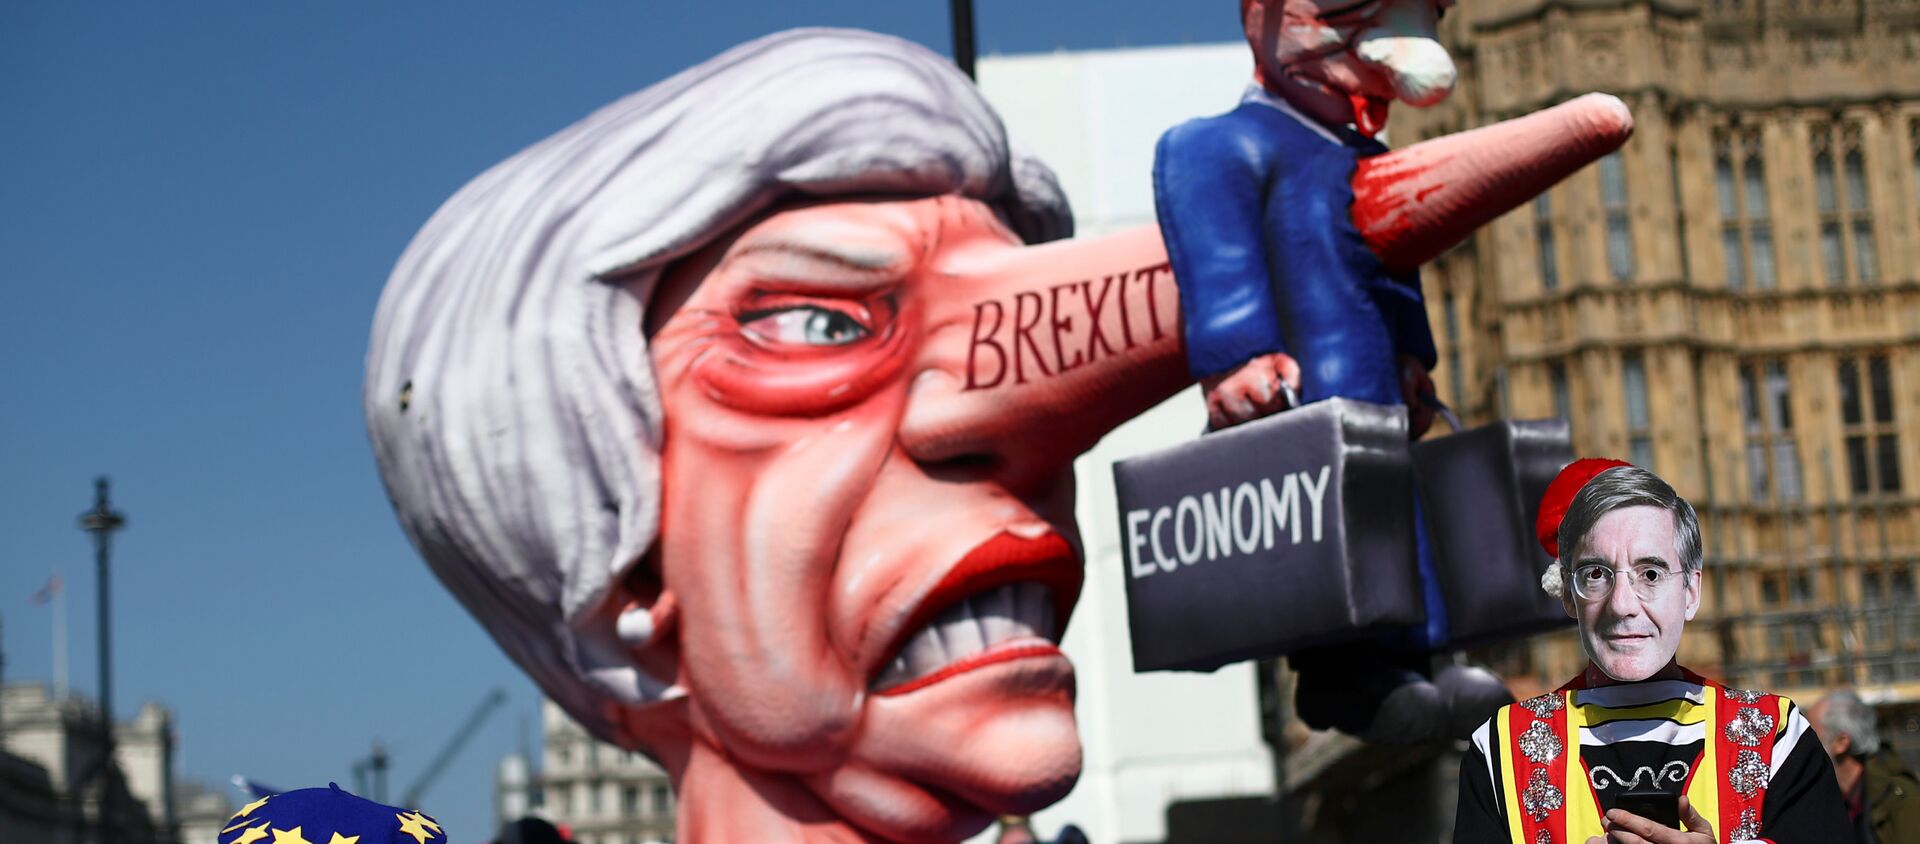 A man wearing a mask of Britain's Conservative Party MP Jacob Rees-Mogg is pictured next to anti-Brexit protesters outside the Houses of Parliament in London, Britain April 1, 2019 - Sputnik International, 1920, 02.05.2019